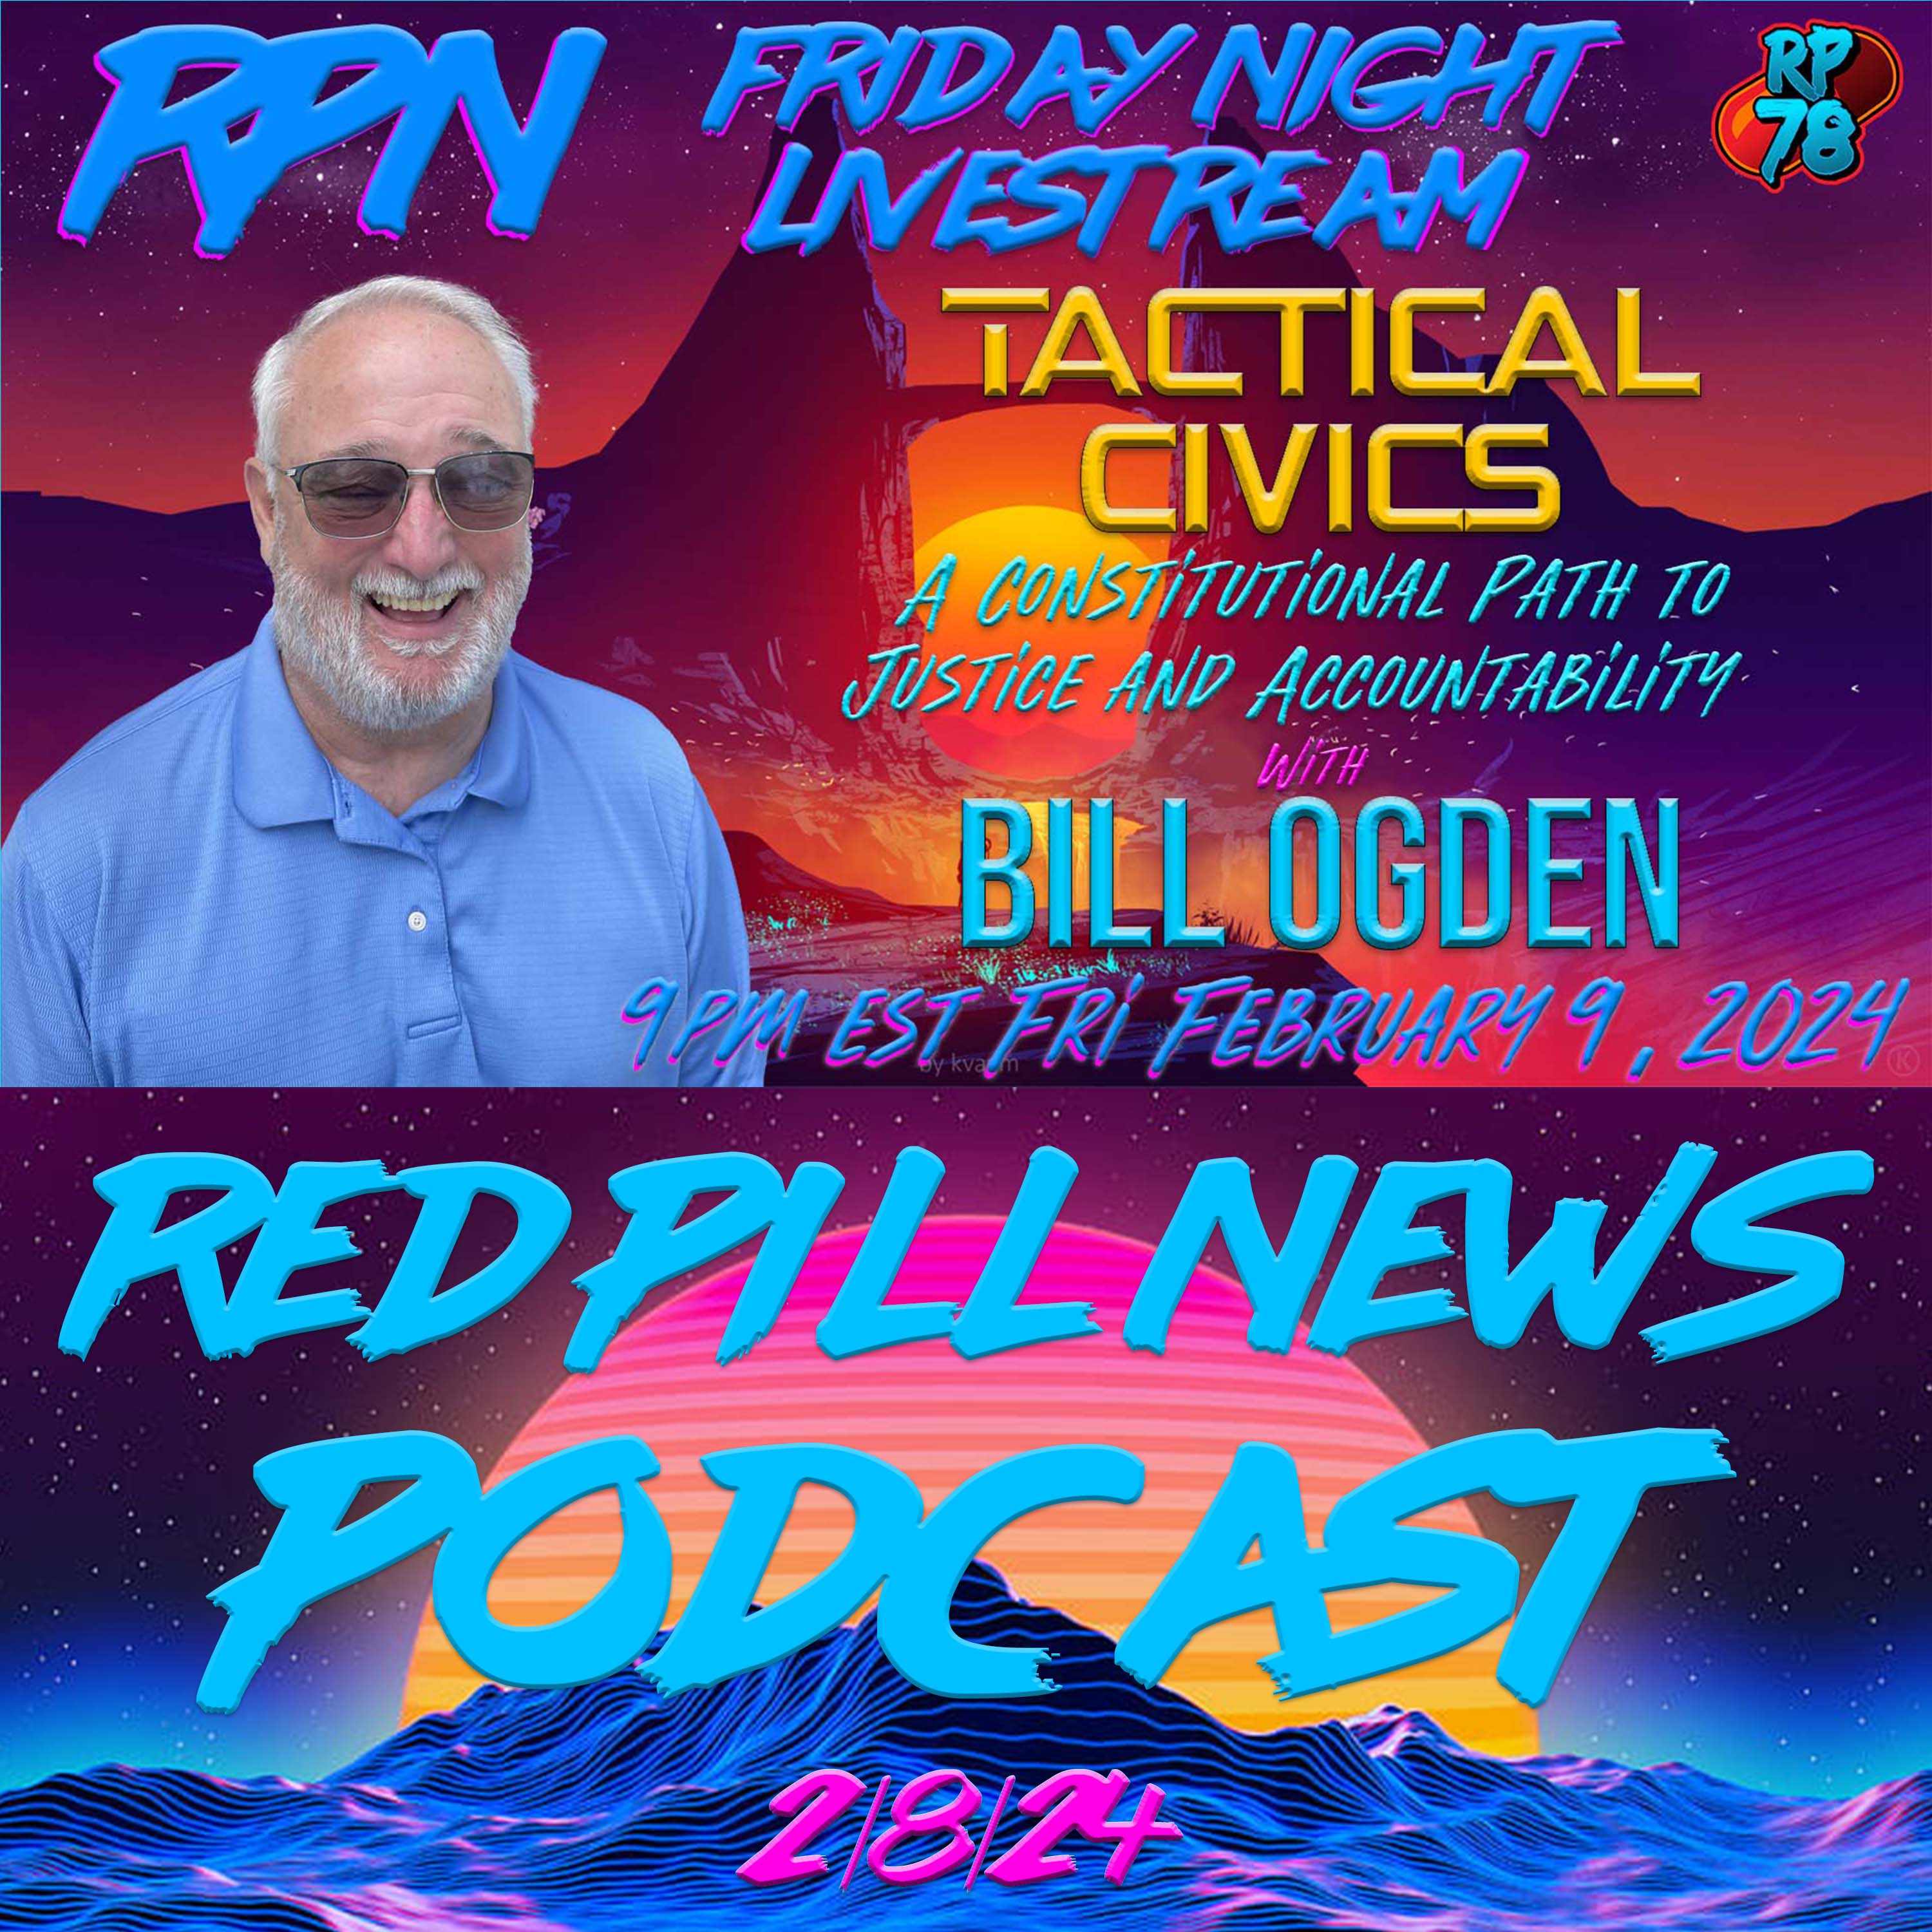 Enforcing the Constitution with Tactical Civics and Bill Ogden on Fri. Night Livestream